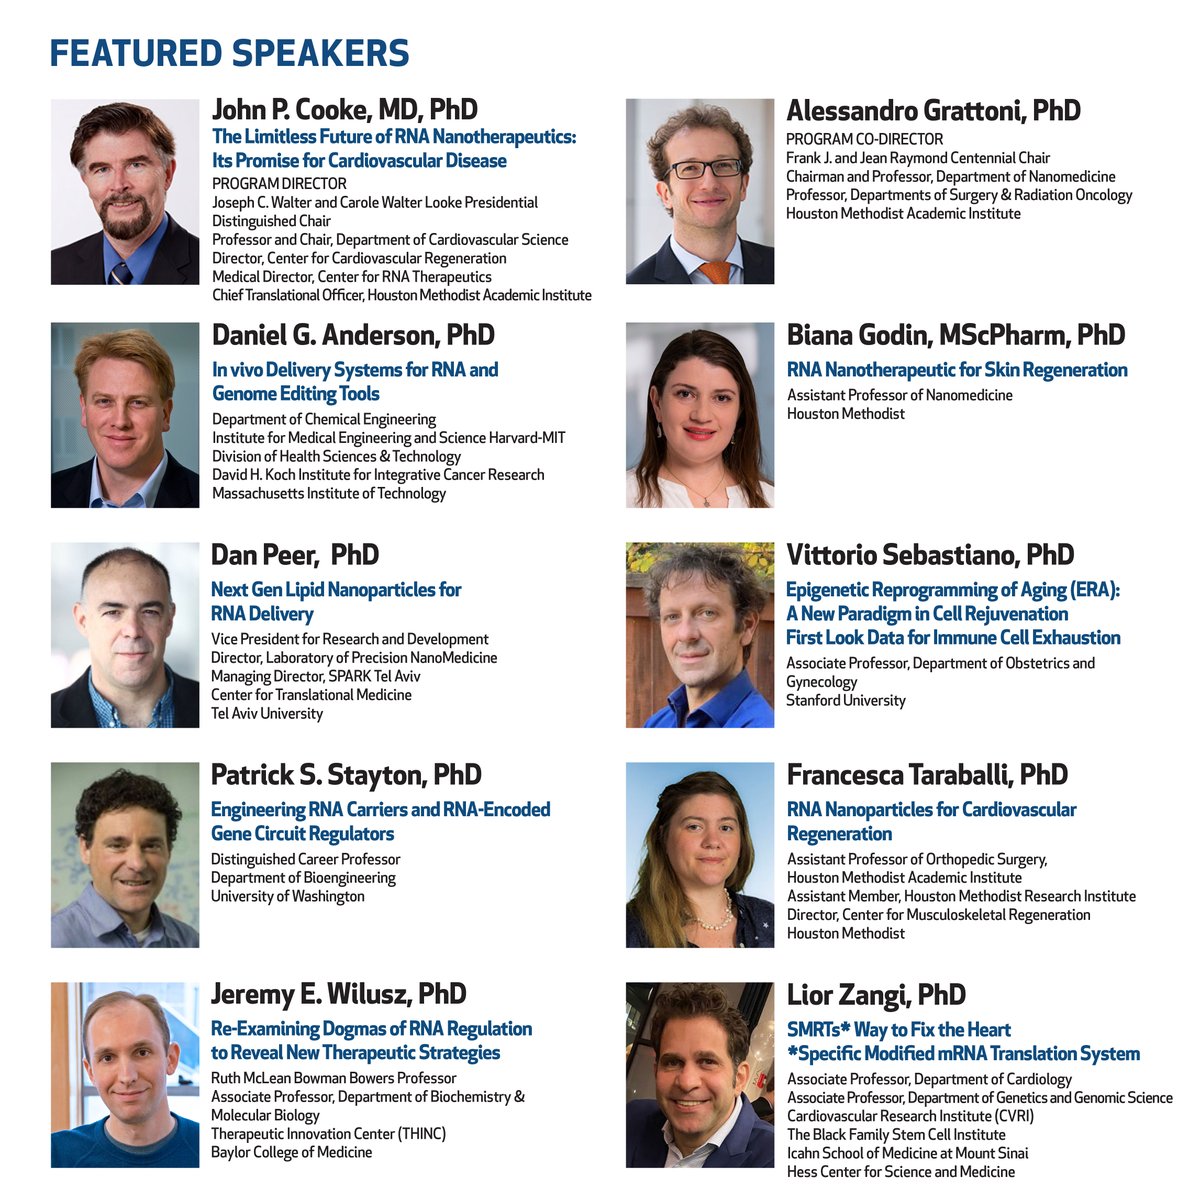 Meet our featured guests at “The New Frontier of RNA Nanotherapeutics' on Oct.24. Speakers will discuss RNA vaccine breakthroughs and preview emerging RNA nanotherapeutics. @TaraballiPhD @JeremyWilusz @peer_lab @GrattoniLab #Kostas2022 Event Registration: bit.ly/3g3feF5